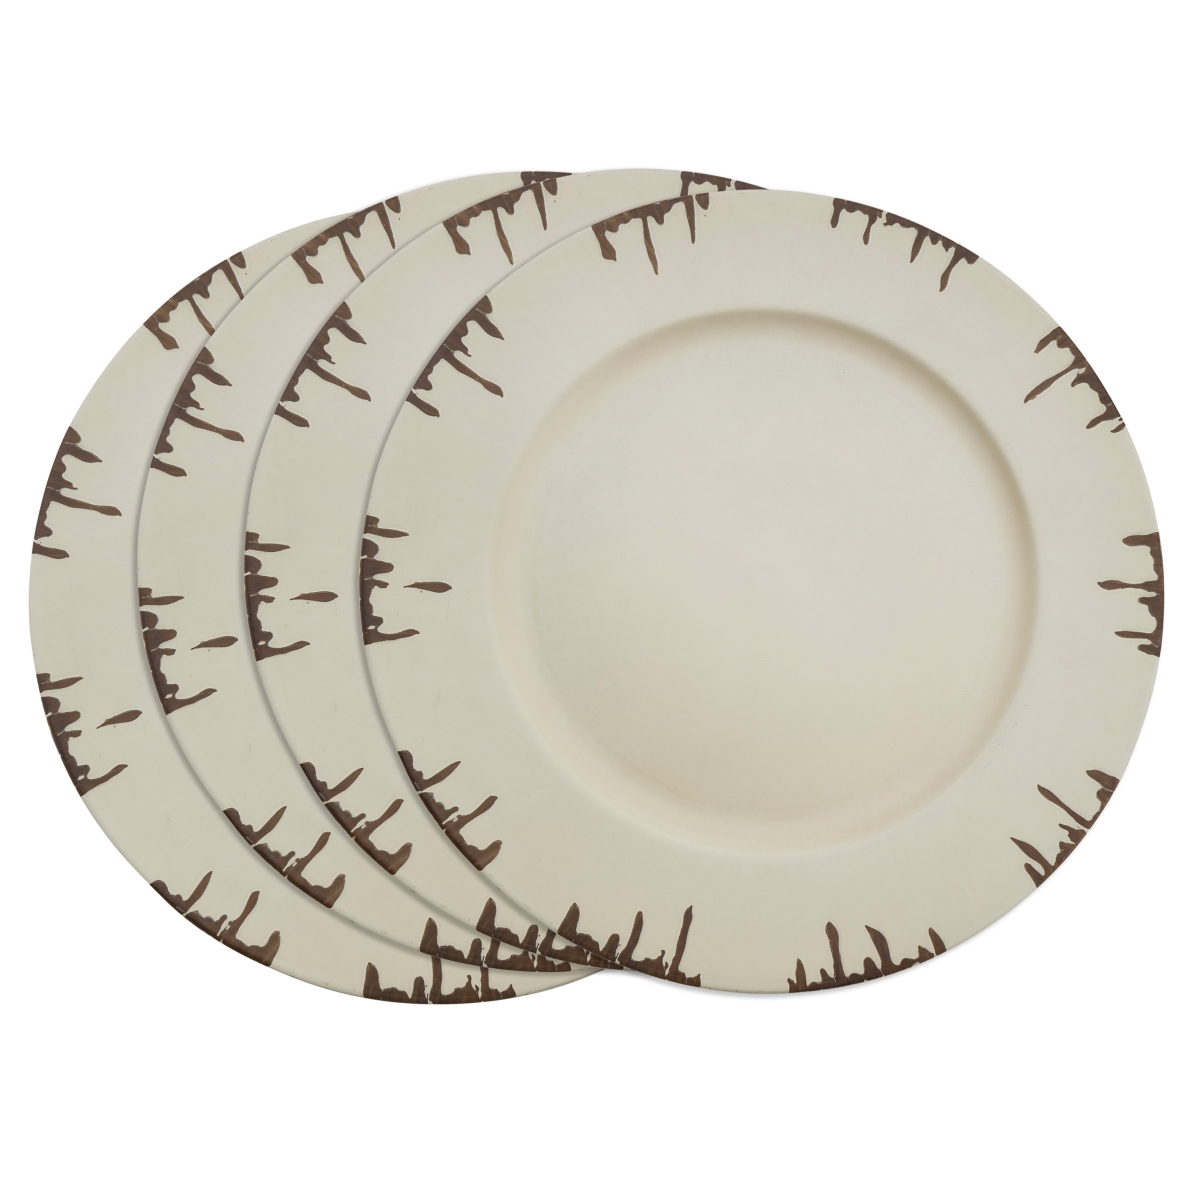 Ch133.i13r 13 In. Round Distressed Edge Charger Plate, Ivory - Set Of 4